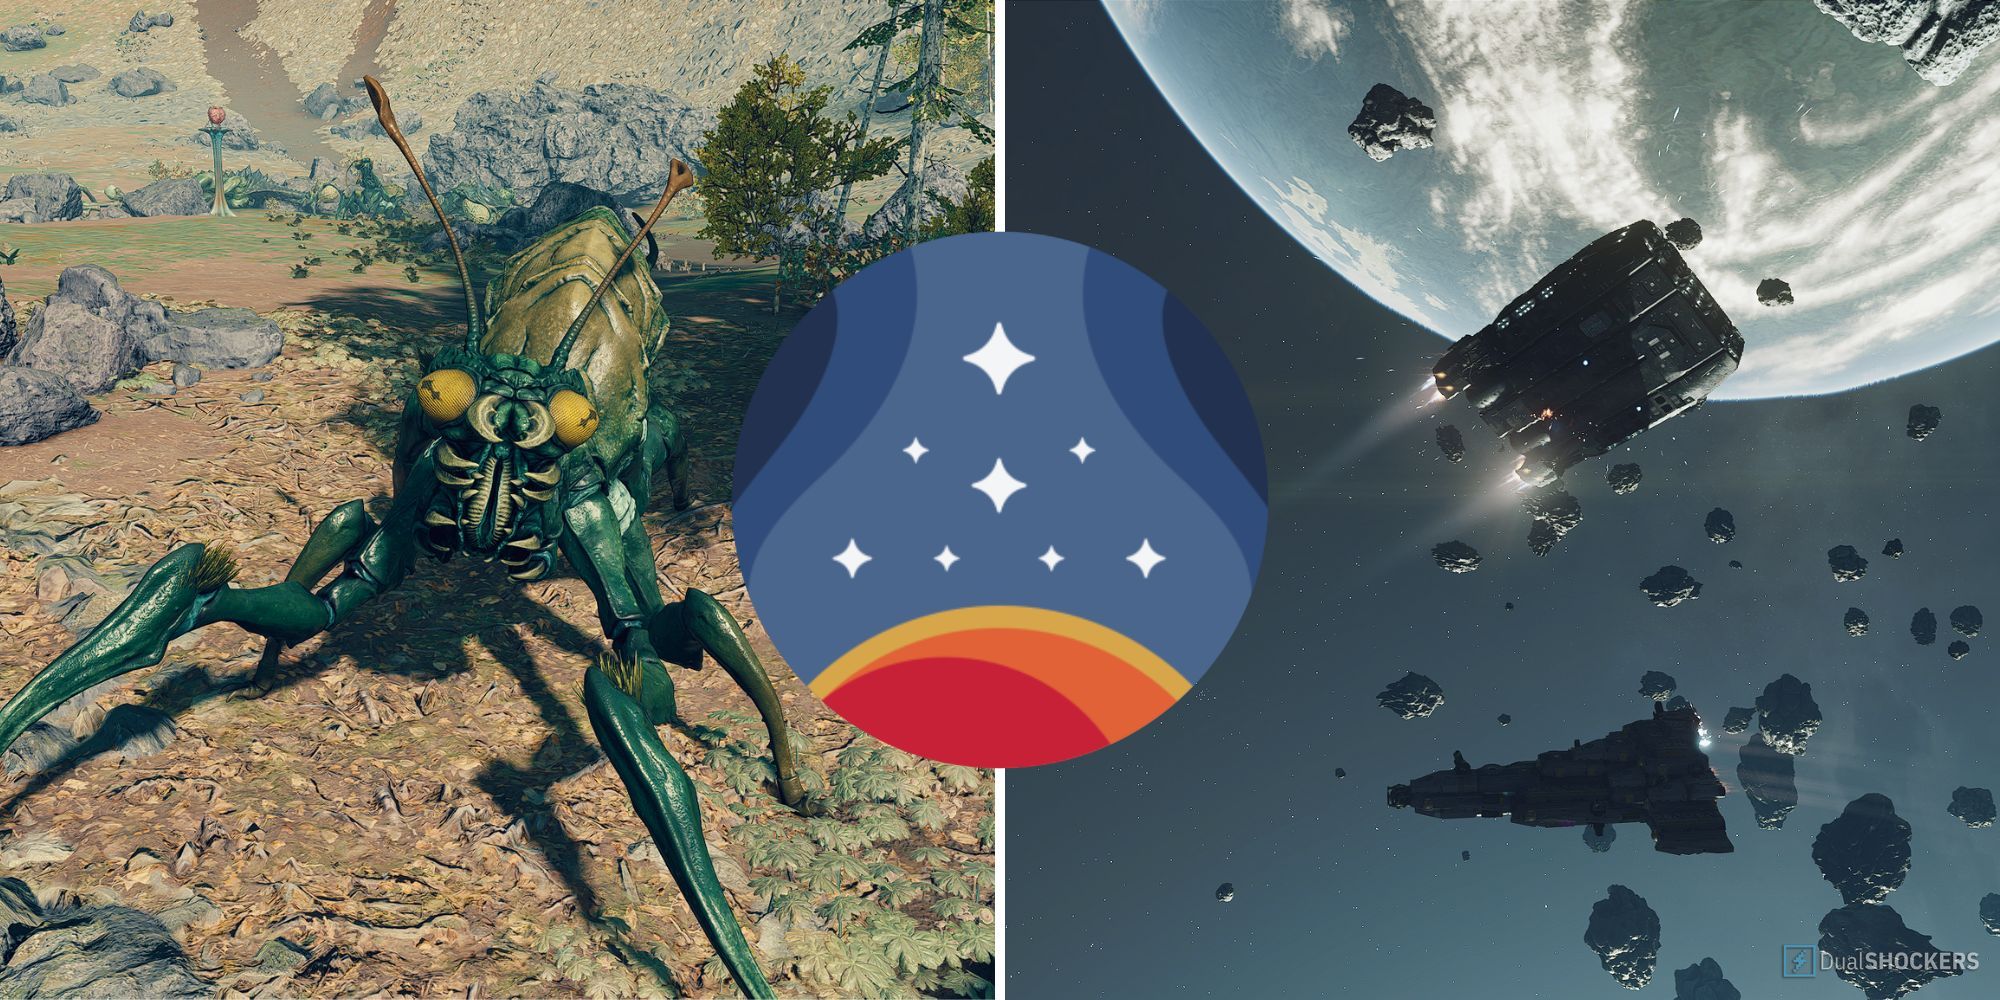 Starfield's Constellation logo separates a hunting cricket from Tau Ceti and a space battle